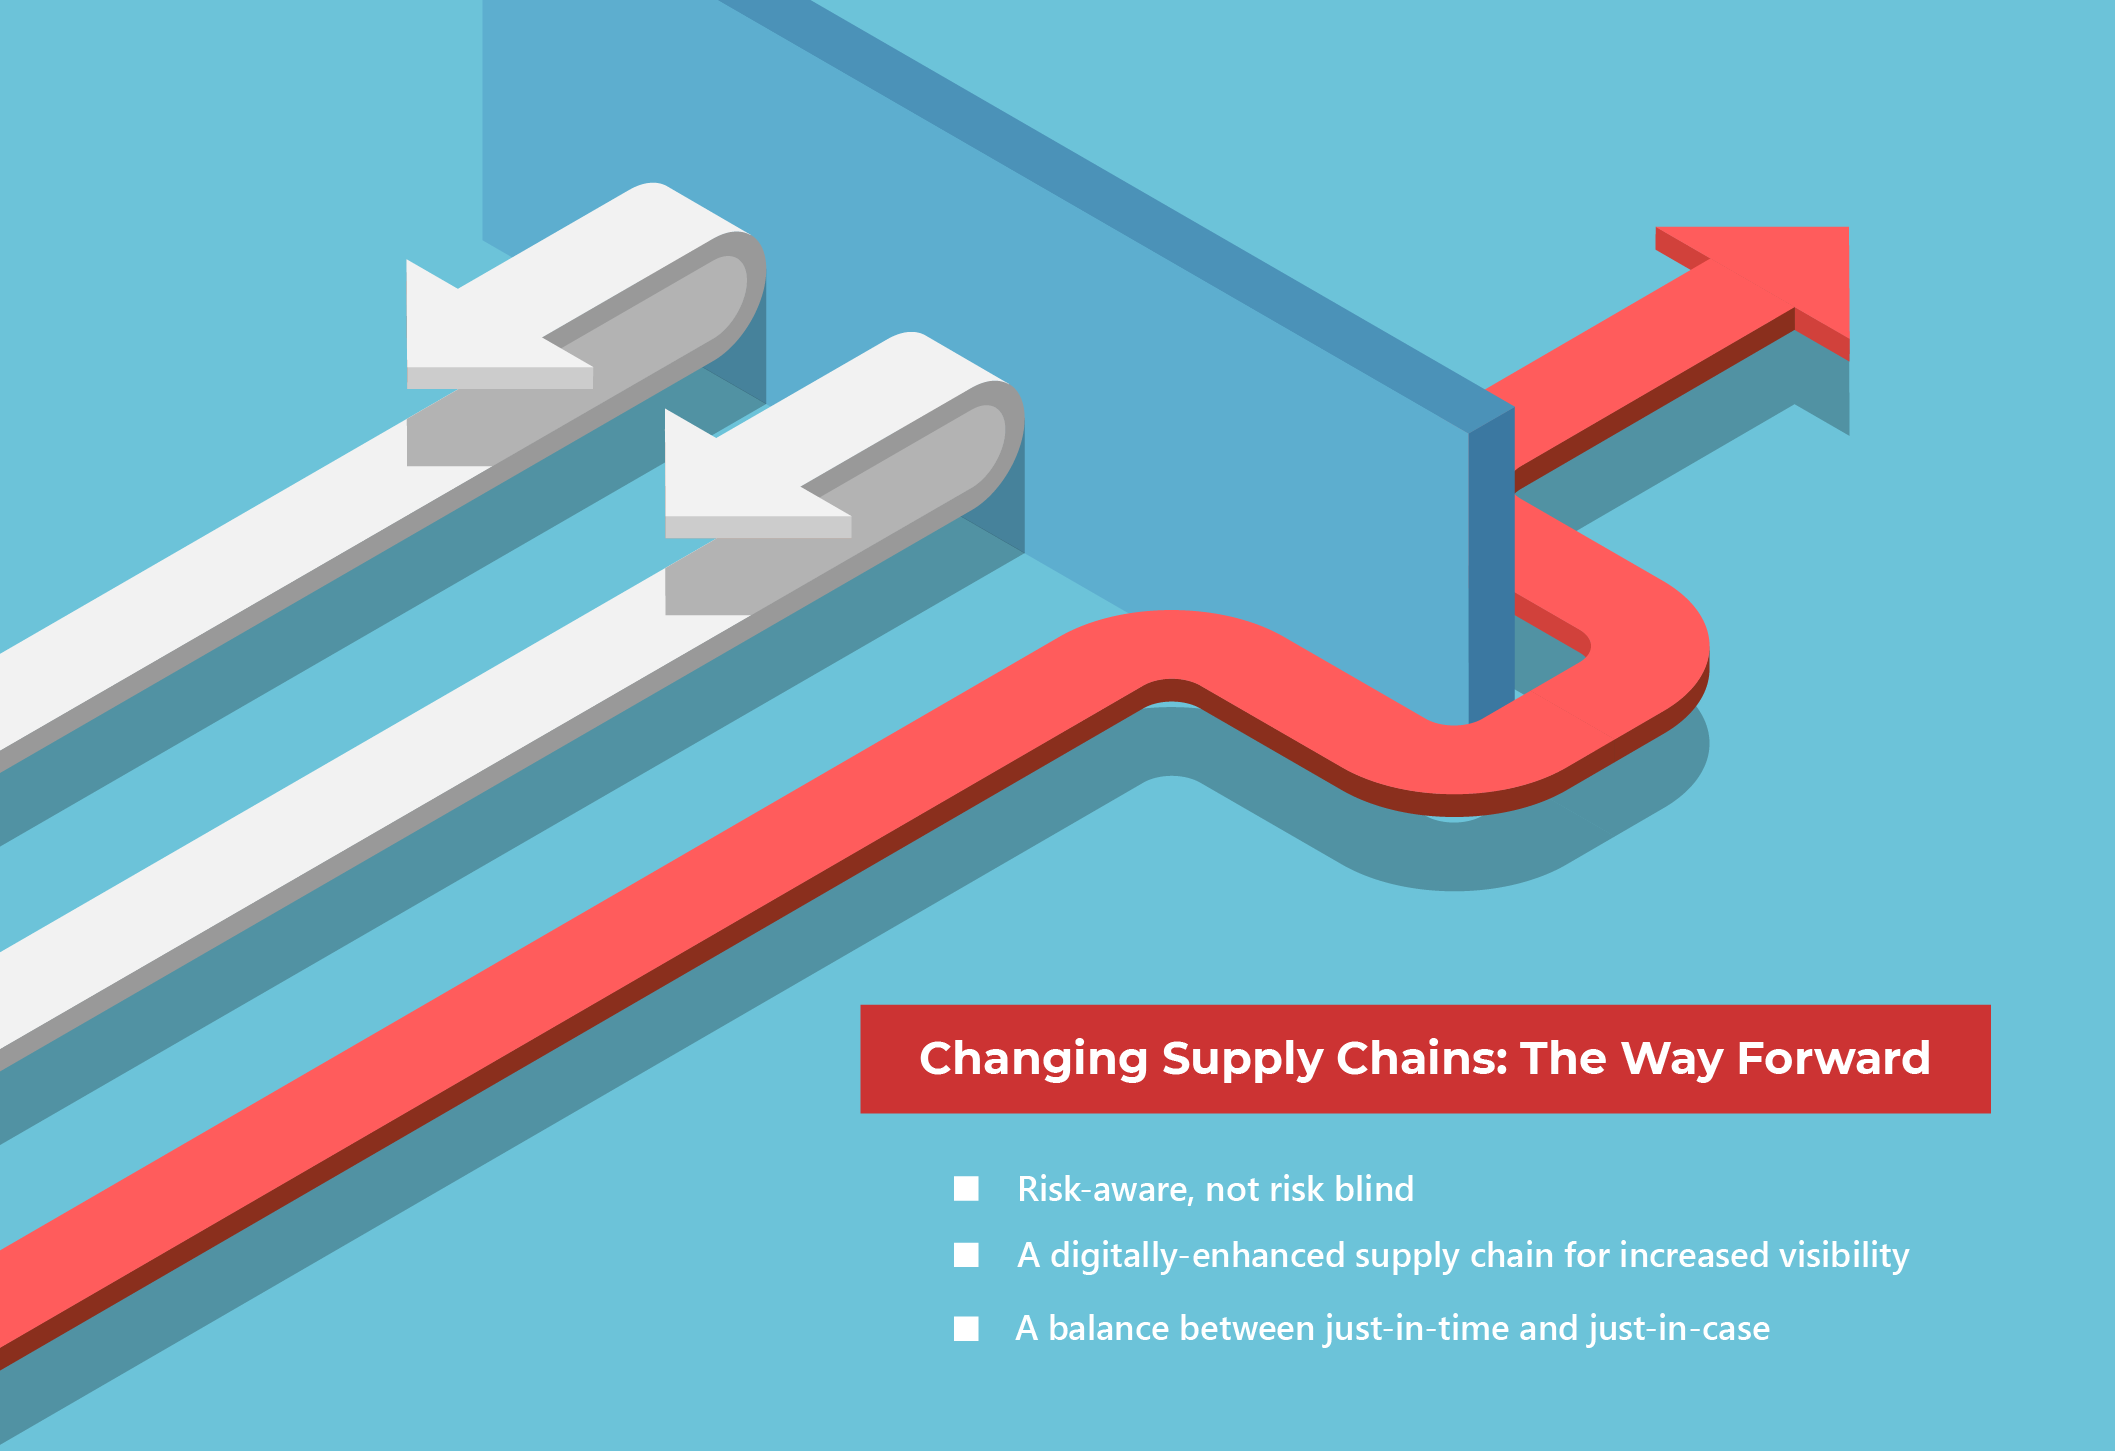 Challenges and Changes for Global Supply Chains